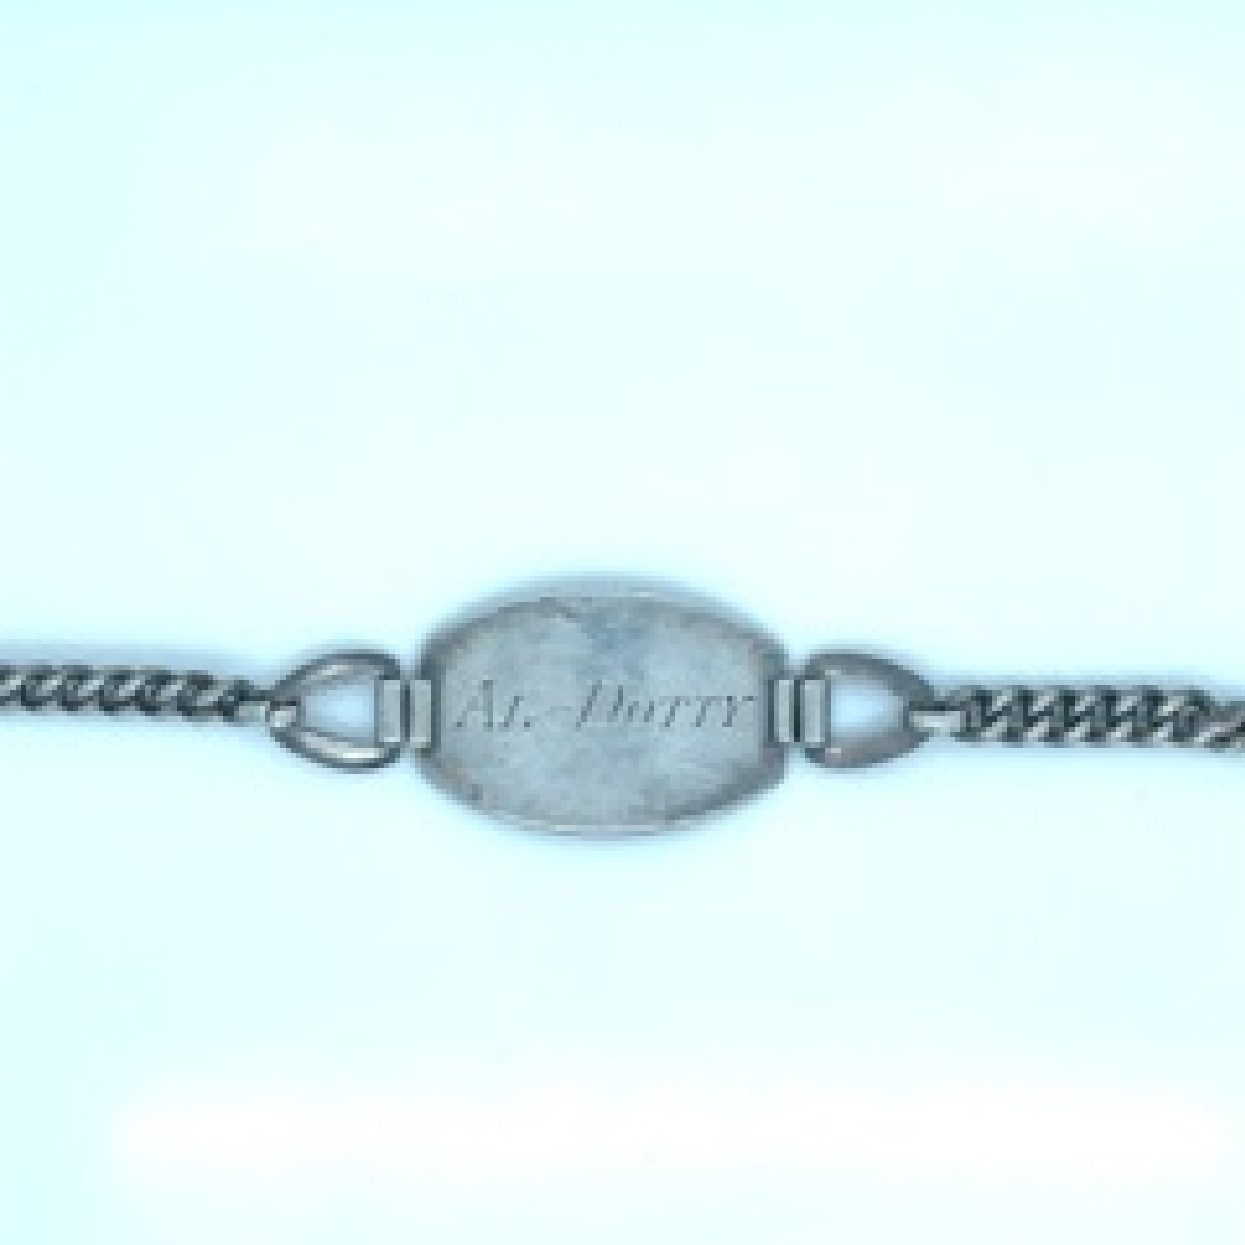 Antique Sterling Silver Bracelet
8 Inches